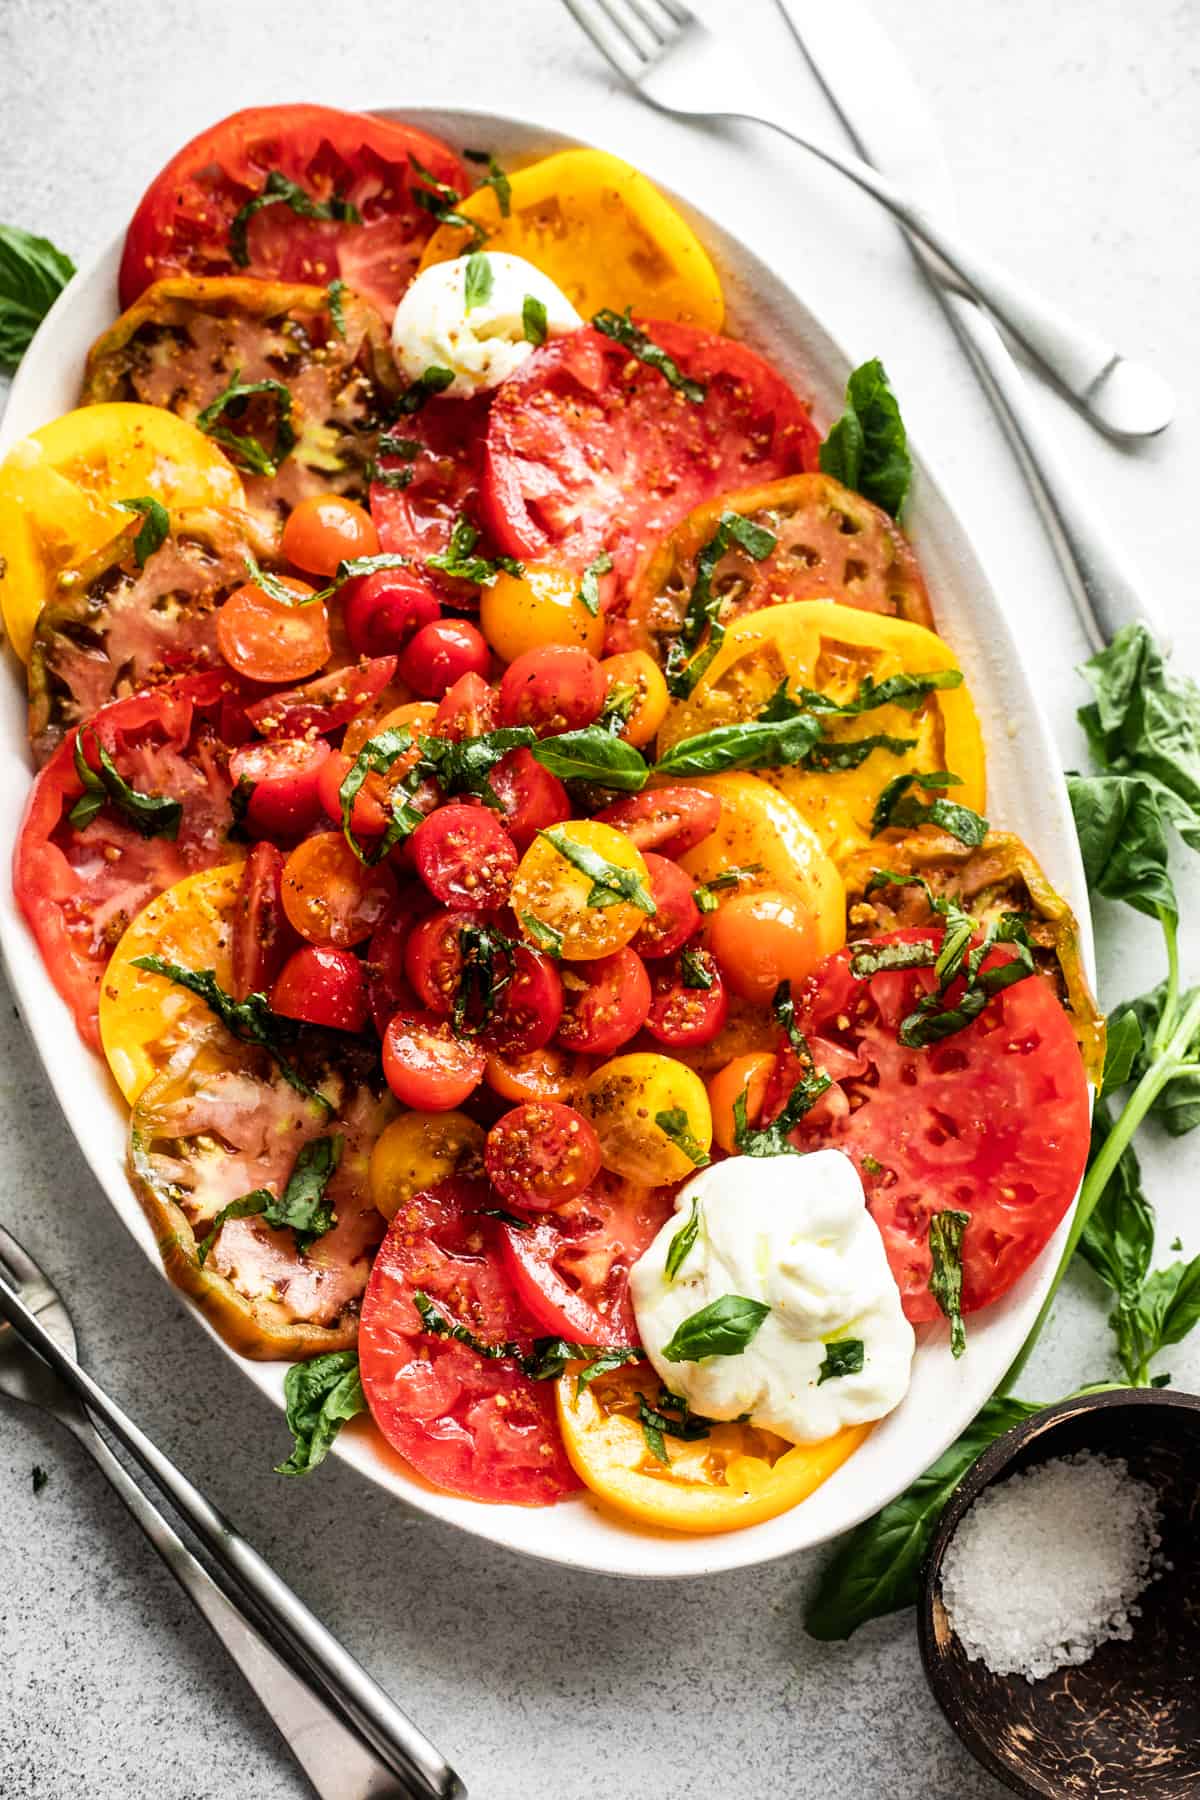 slices of heirloom tomatoes arranged on an oval platter, with halved cherry tomatoes placed in the center, burrata cheese at the top of the plate and the bottom, and a garnish of basil over the entire salad.